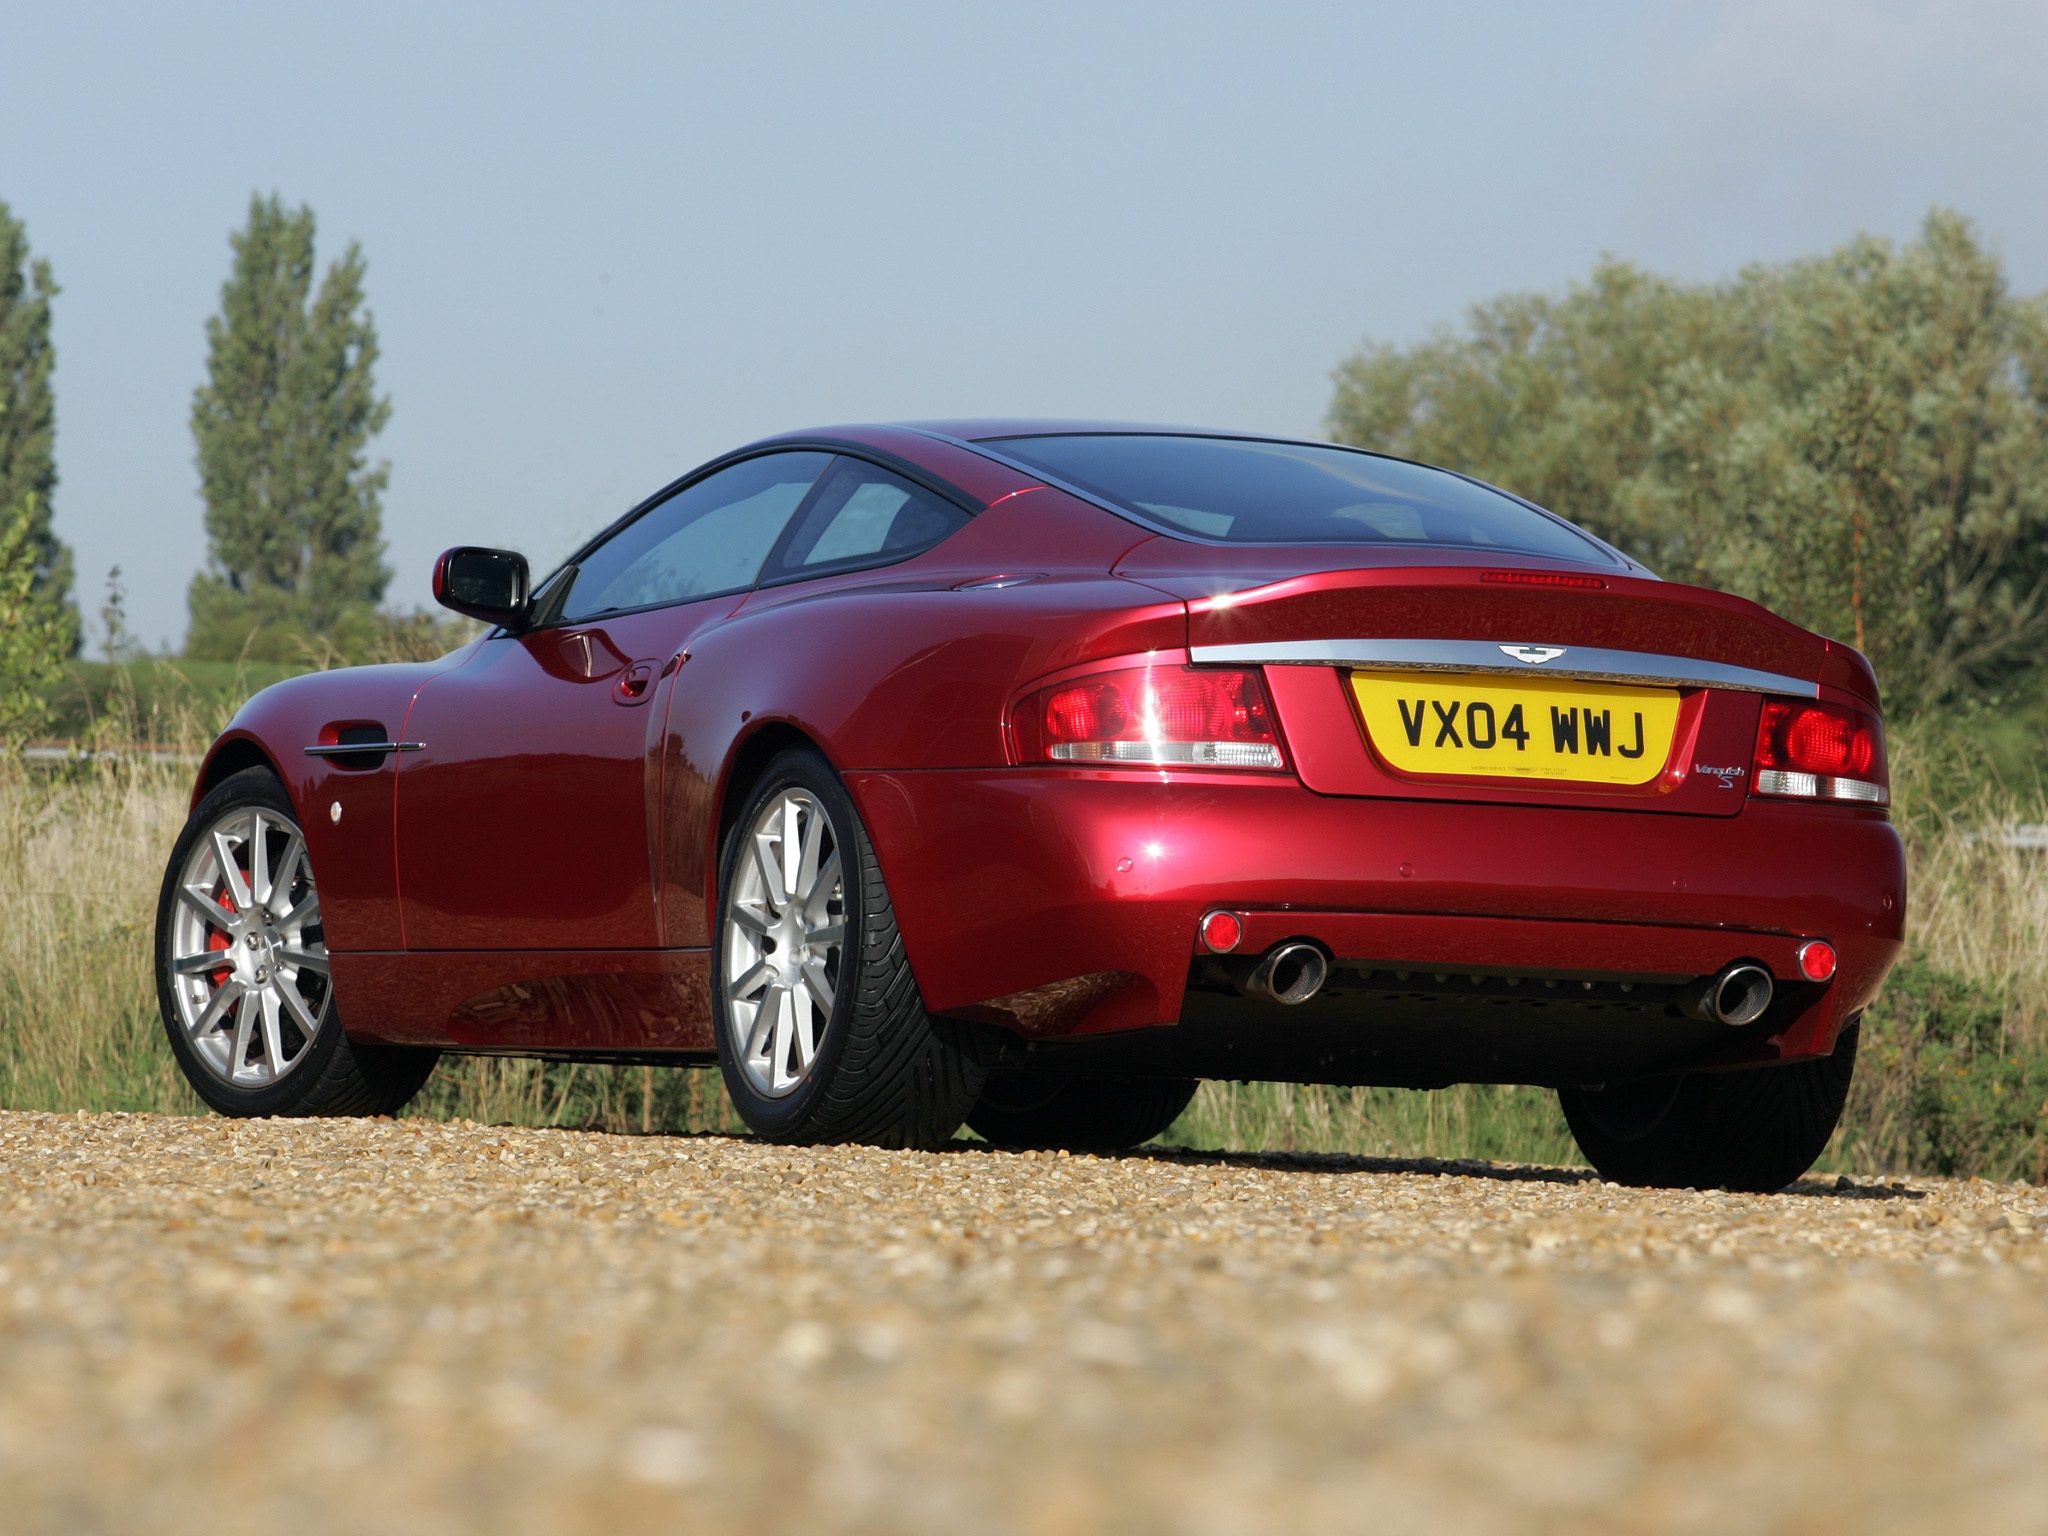 2004, cars, nature, aston martin, red, back view, rear view, style, v12, vanquish